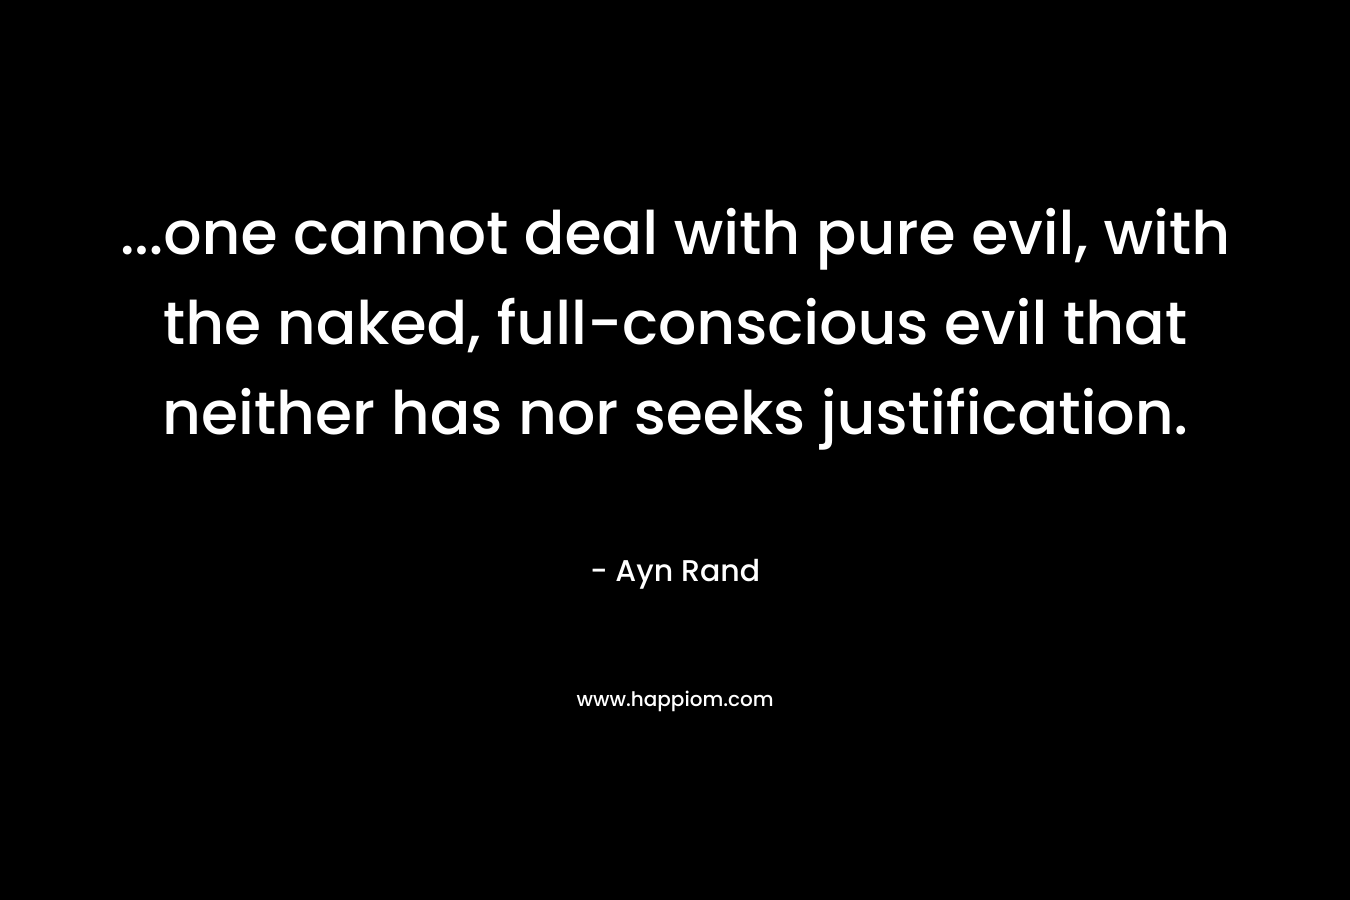 …one cannot deal with pure evil, with the naked, full-conscious evil that neither has nor seeks justification. – Ayn Rand